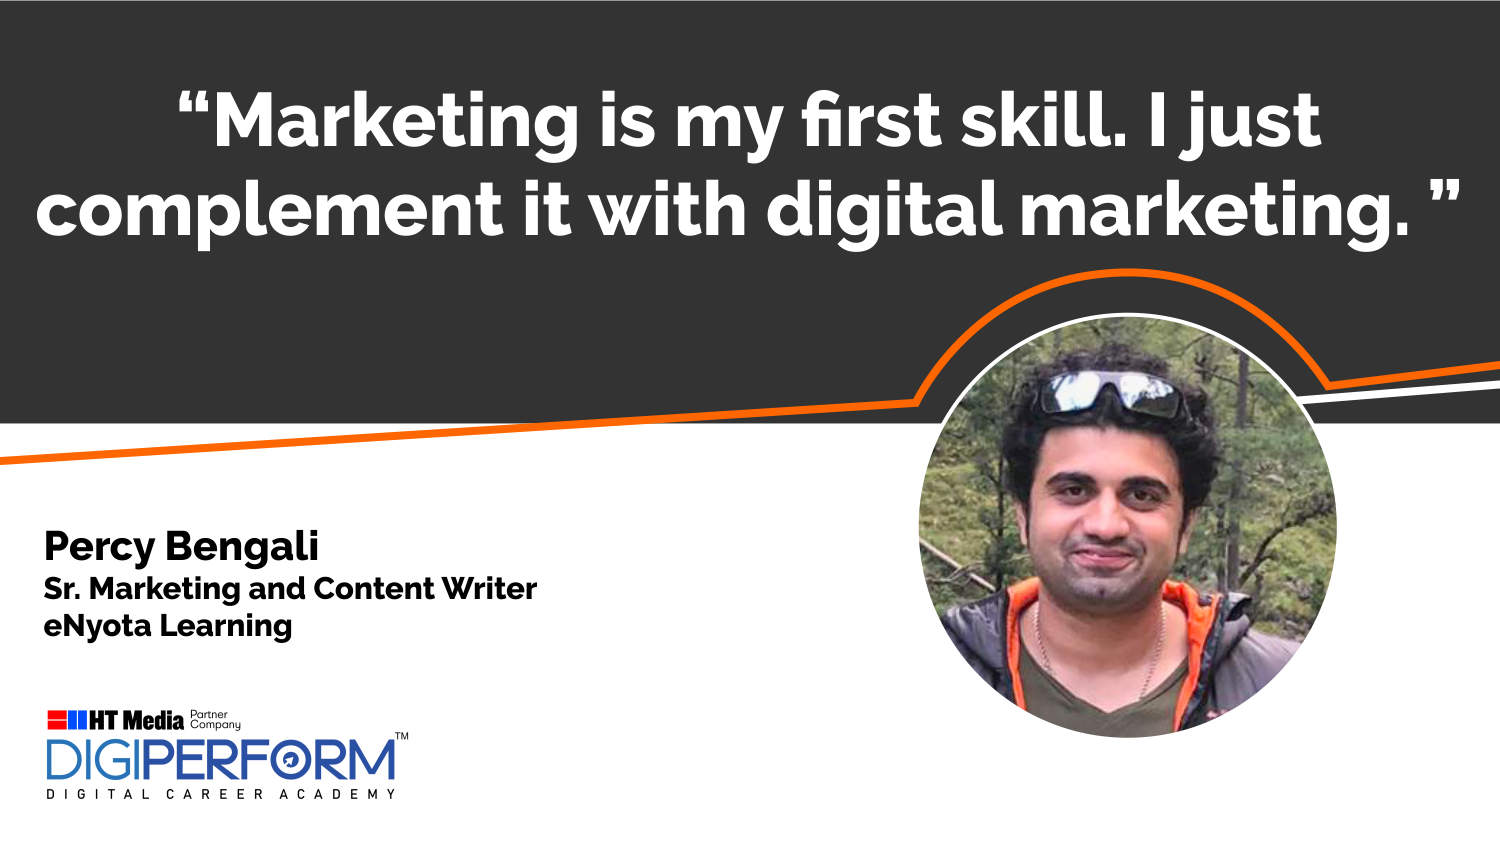 Marketing is my first skill. I just complement it with Digital Marketing.